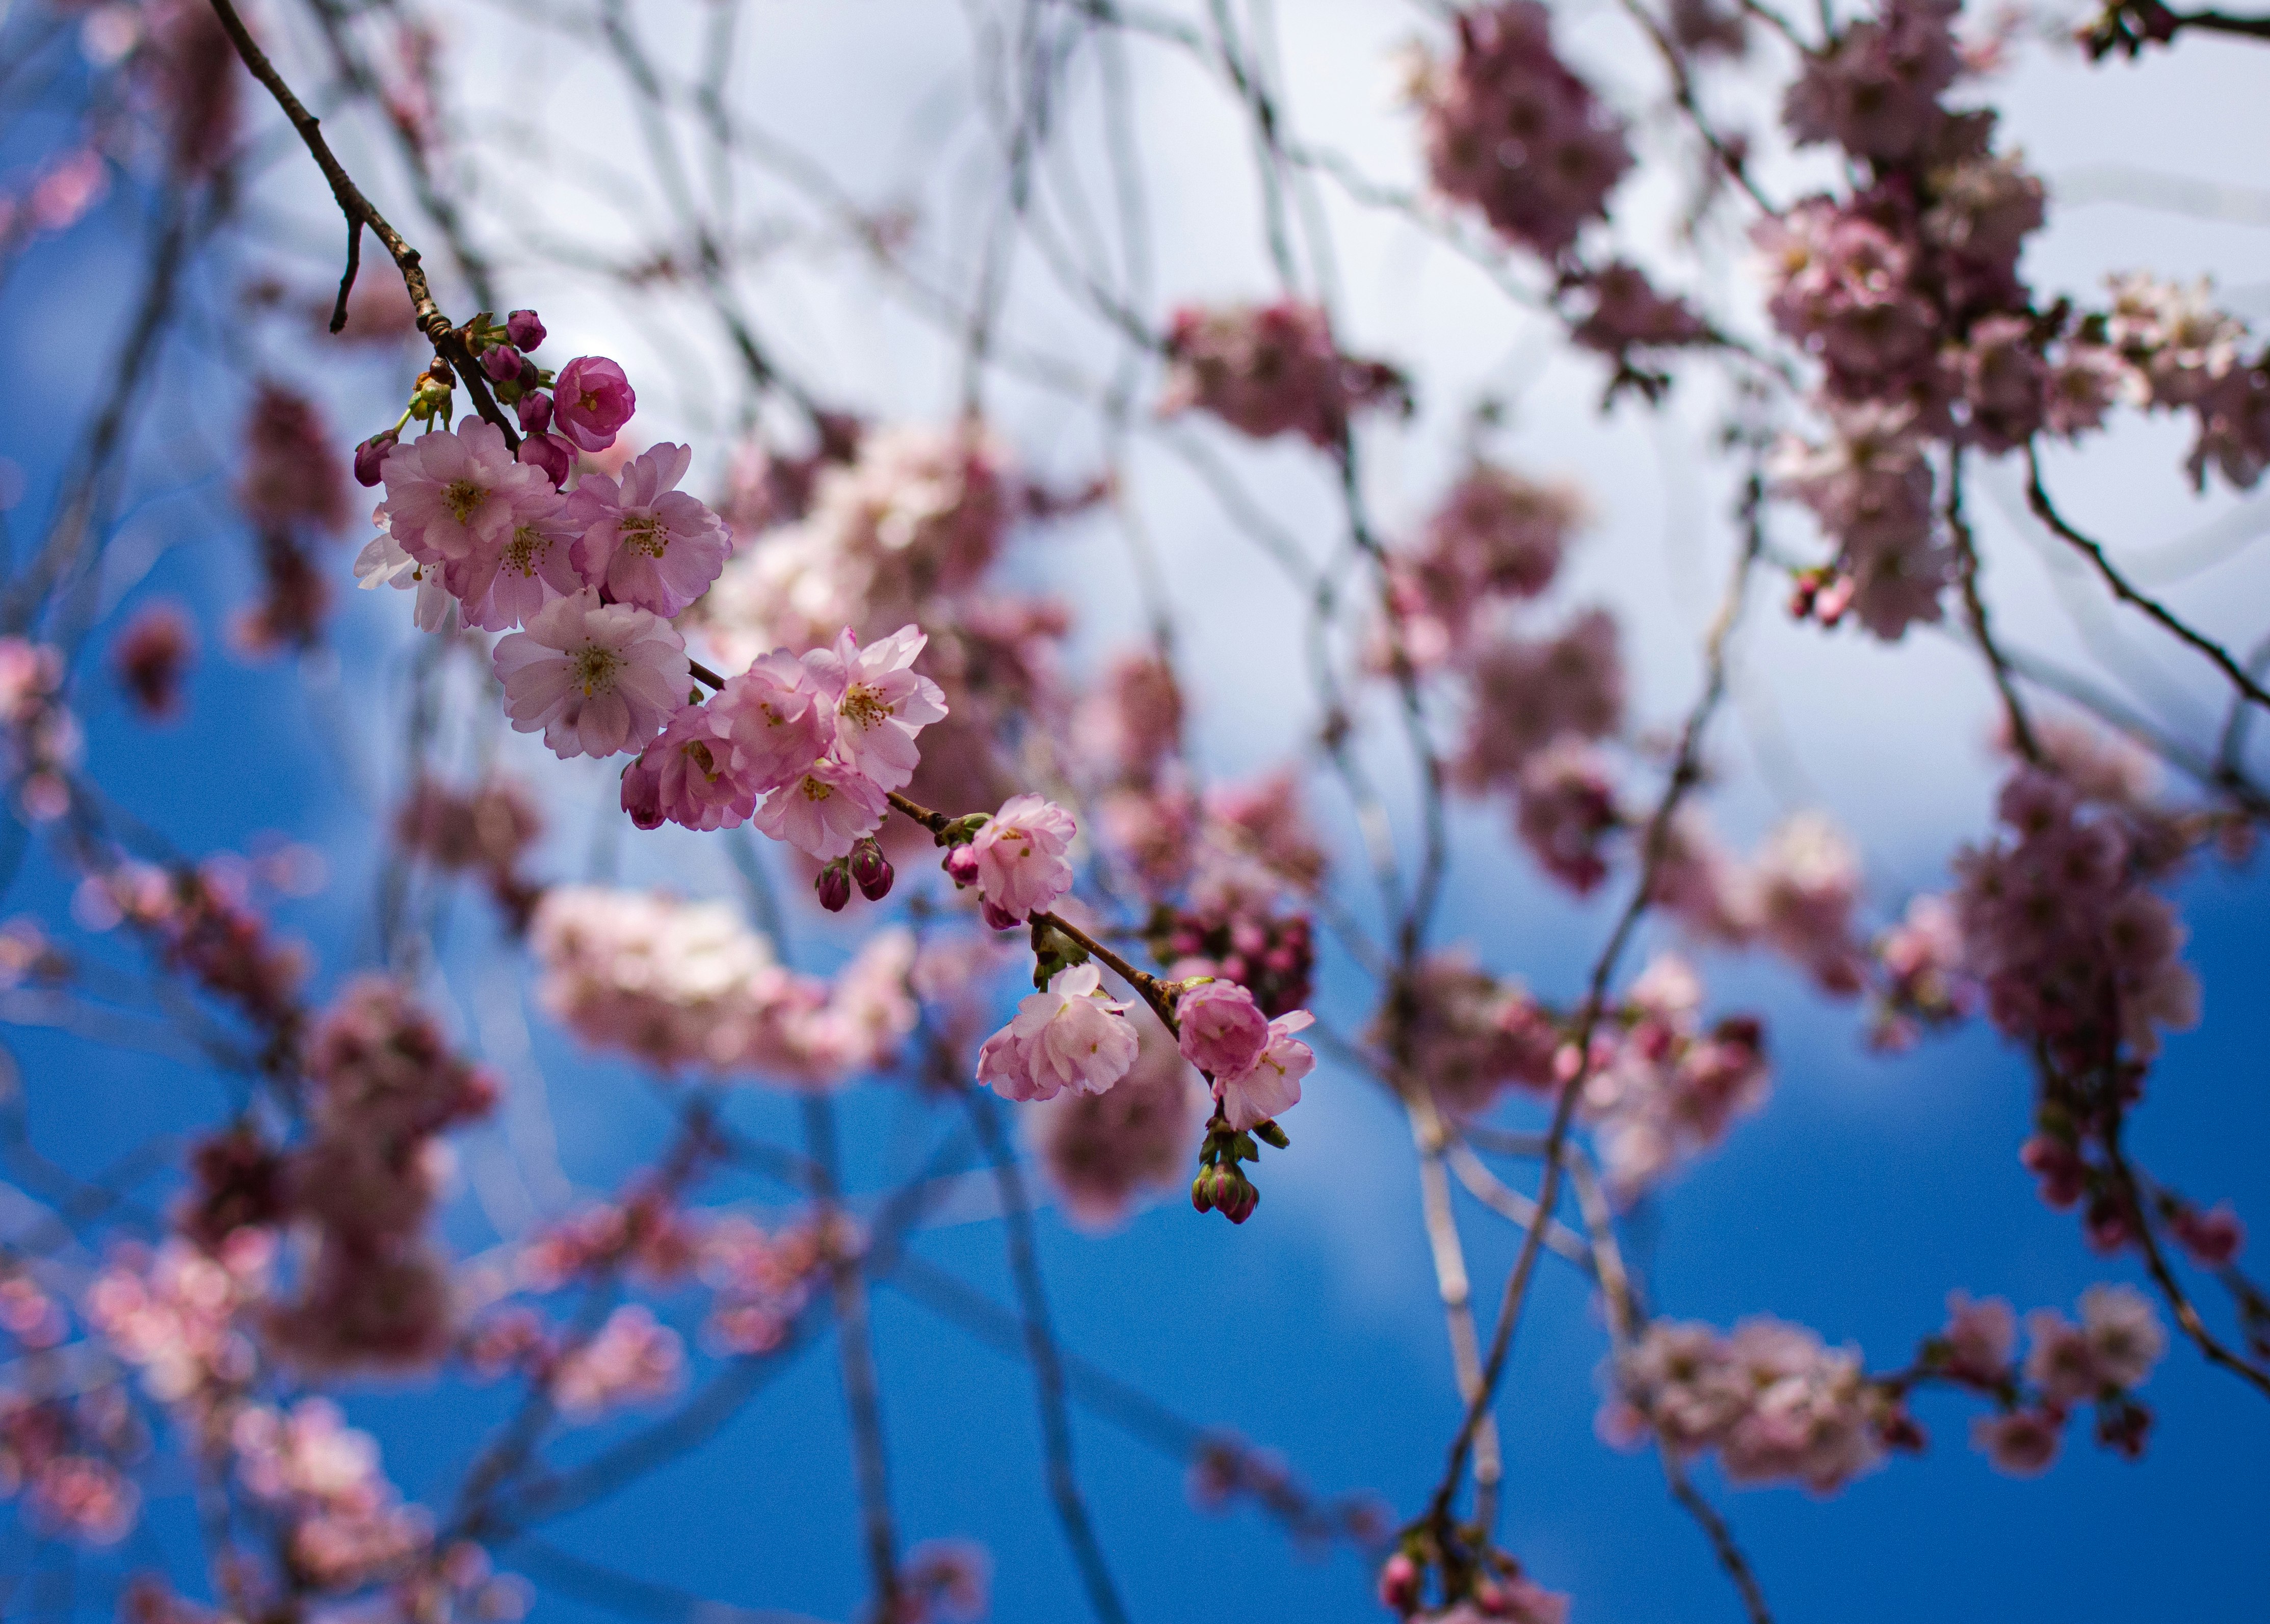 white and pink cherry blossom flowers in bloom during daytime